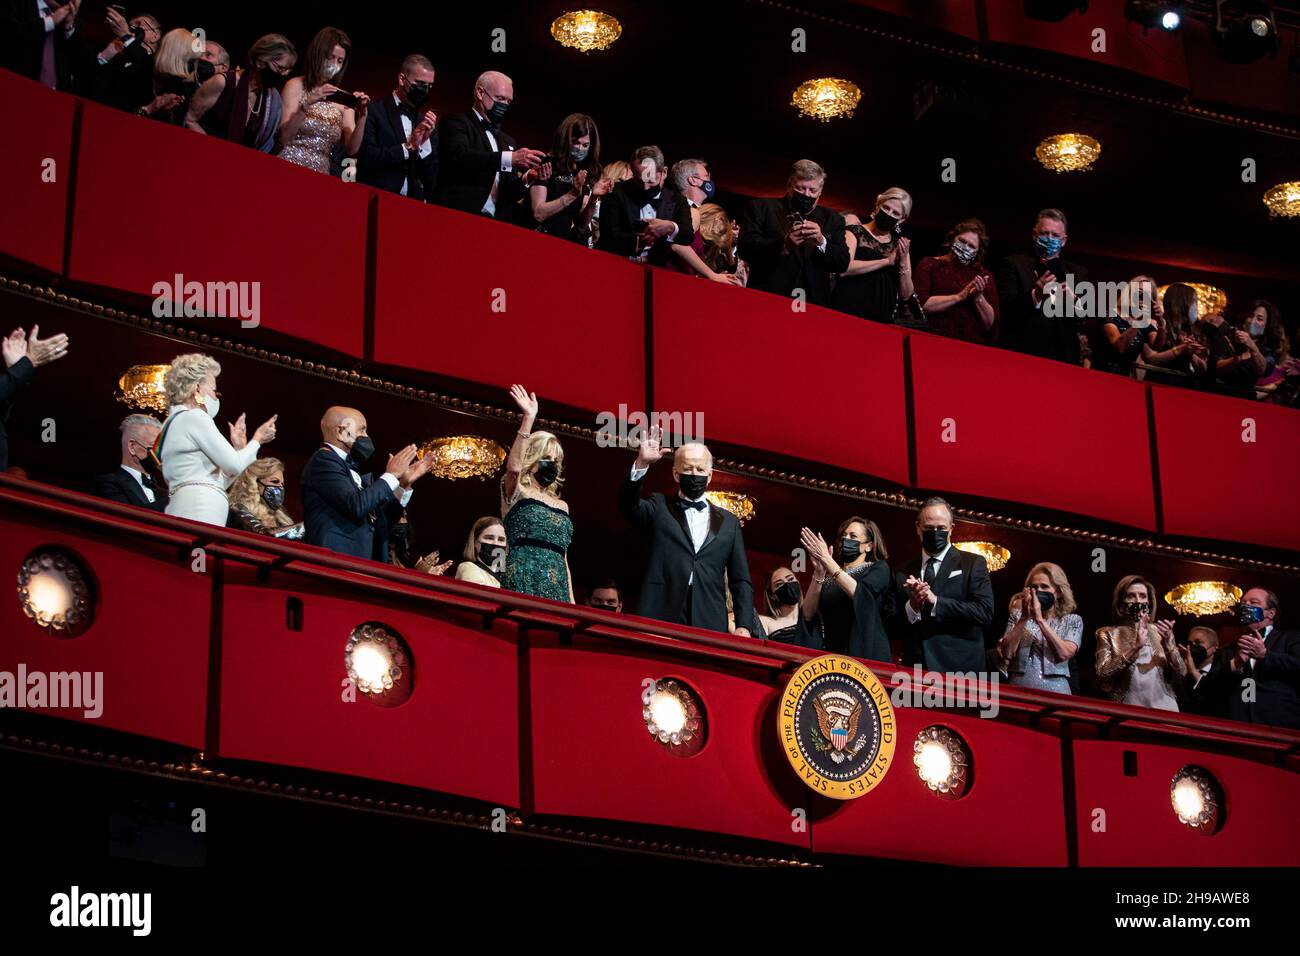 U.S. President Joe Biden, U.S. First Lady Jill Biden, U.S. Vice President Kamala Harris, and Second Gentleman Douglas Emhoff arrive during the 44th Kennedy Center Honors at the John F. Kennedy Center for the Performing Arts in Washington, DC, U.S., on Sunday, Dec. 5, 2021. The 44th Honorees for lifetime artistic achievements include operatic bass-baritone Justino Diaz, Motown founder Berry Gordy, Saturday Night Live creator Lorne Michaels, actress Bette Midler, and singer-songwriter Joni Mitchell. Credit: Al Drago/Pool via CNP /MediaPunch Stock Photo